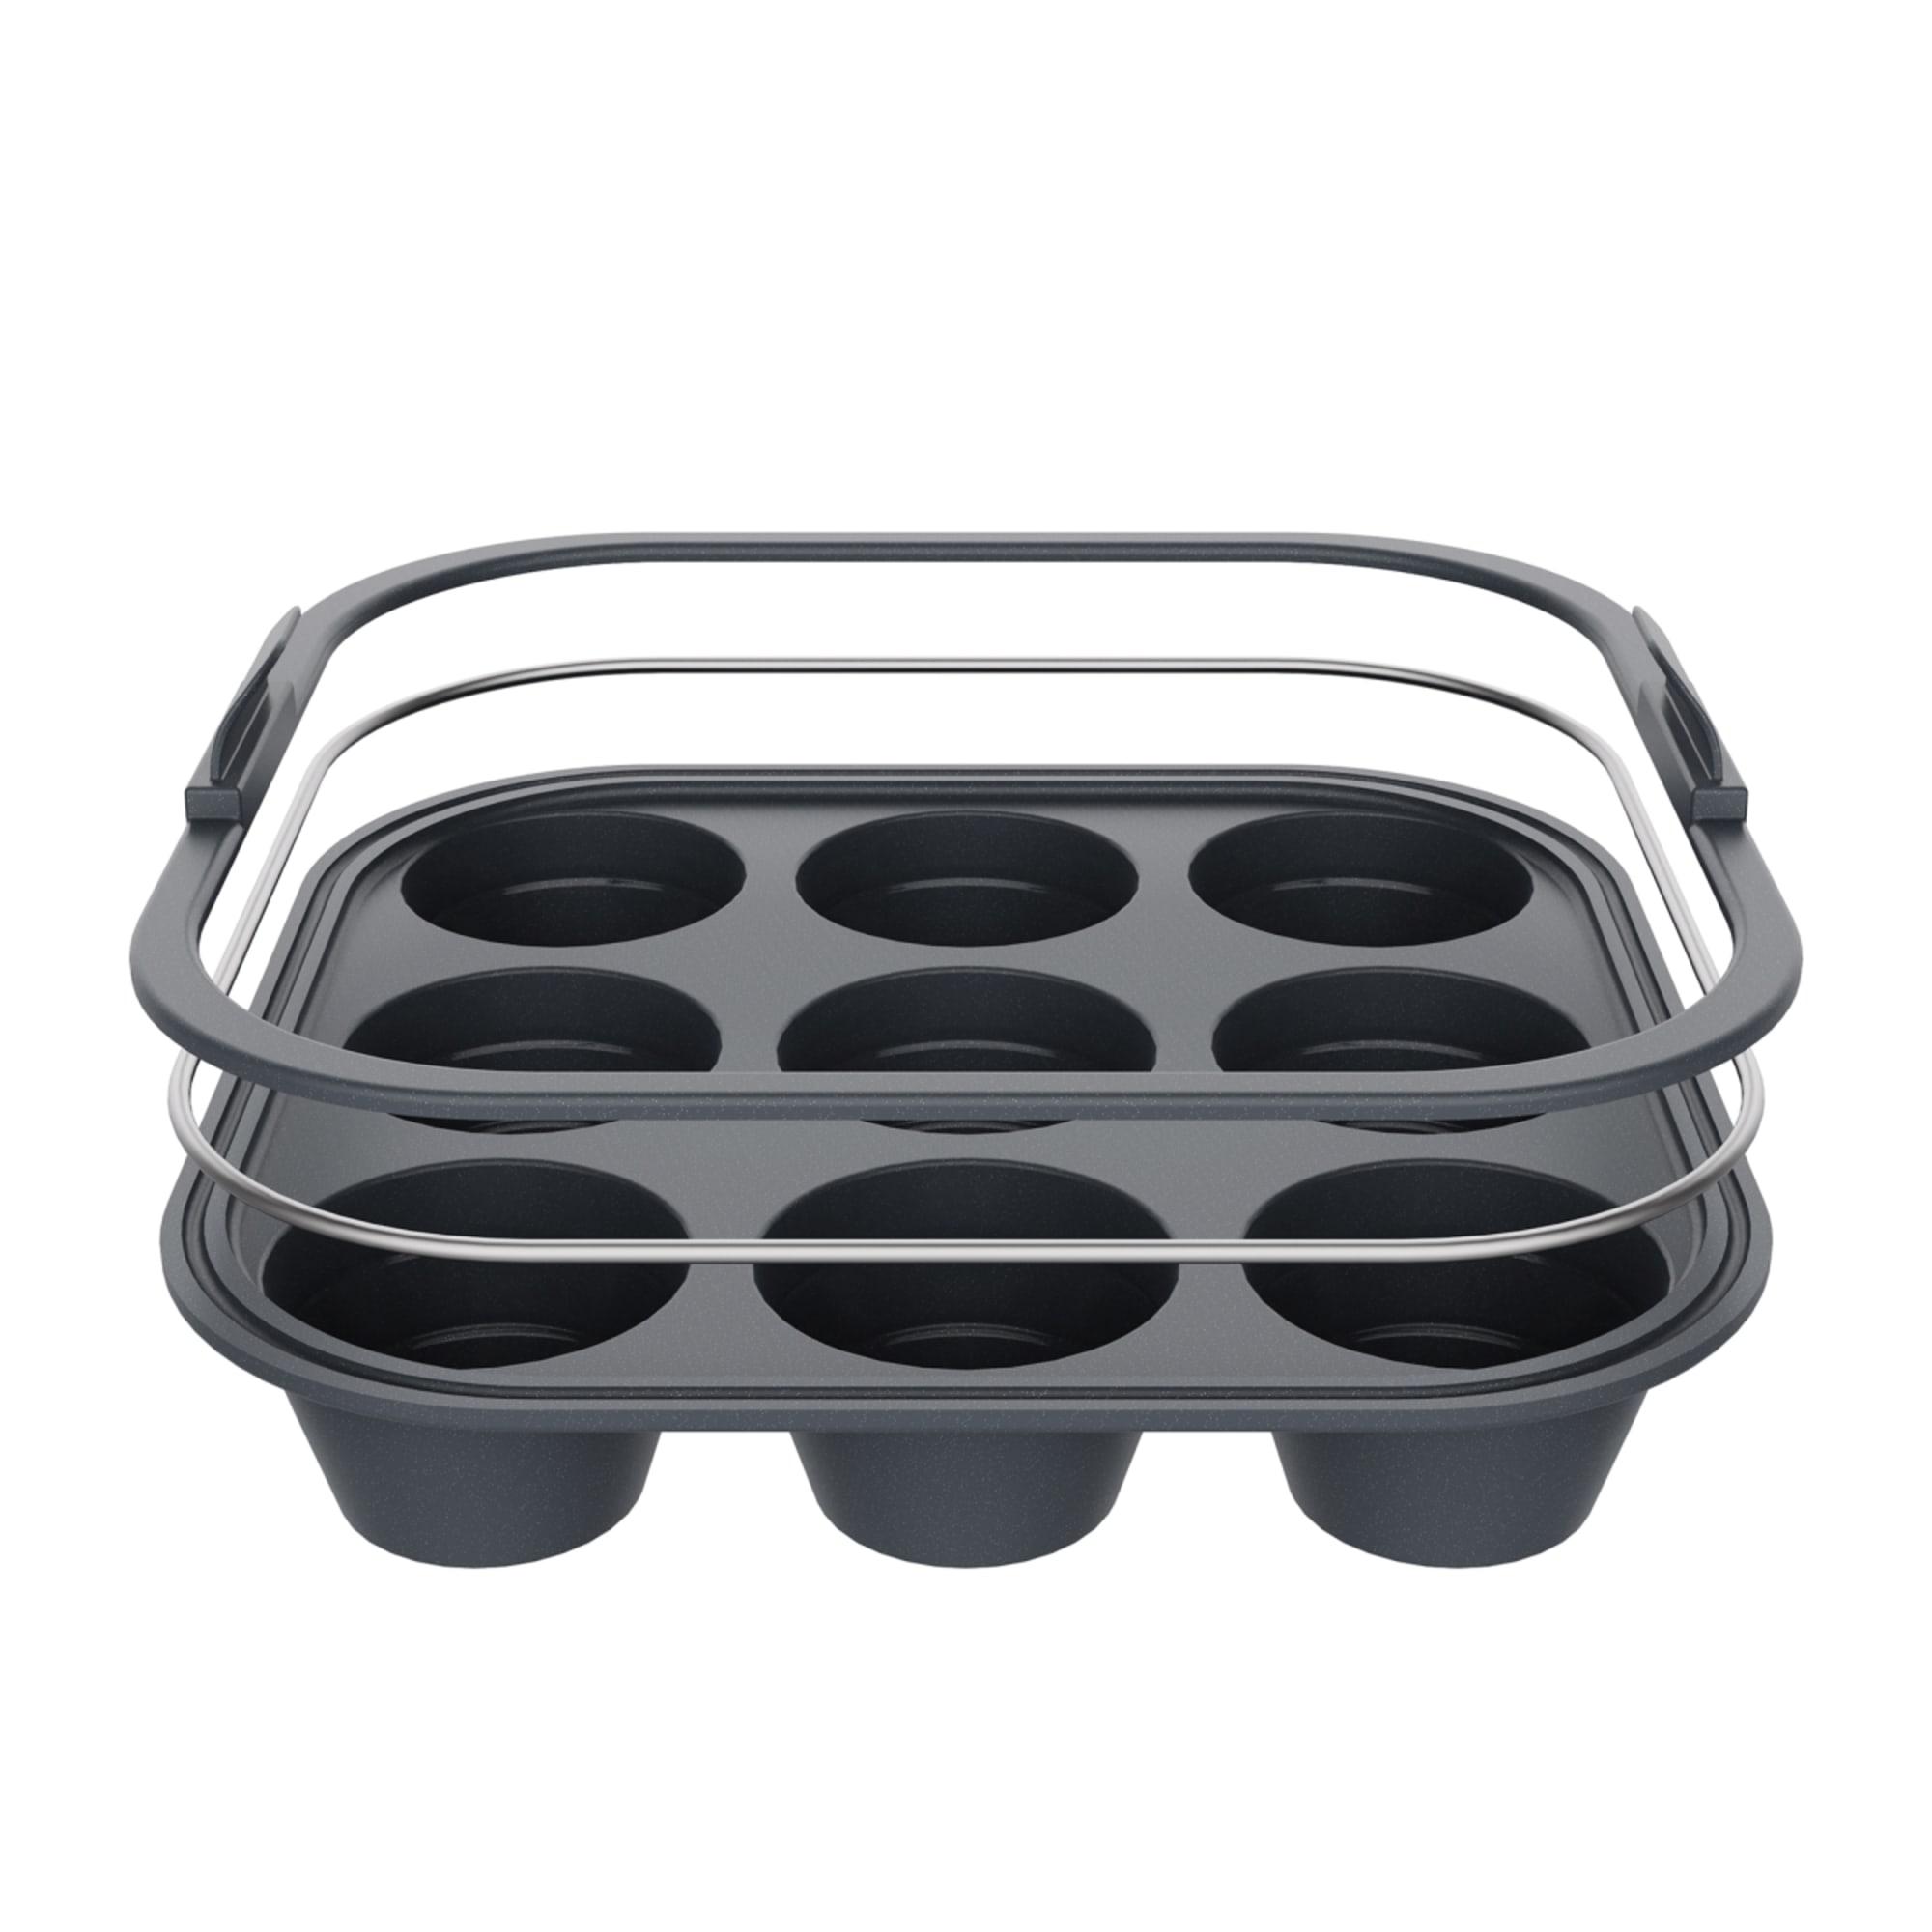 Daily Bake Silicone Square Collapsible Air Fryer Muffin Pan 9 Cup Image 5